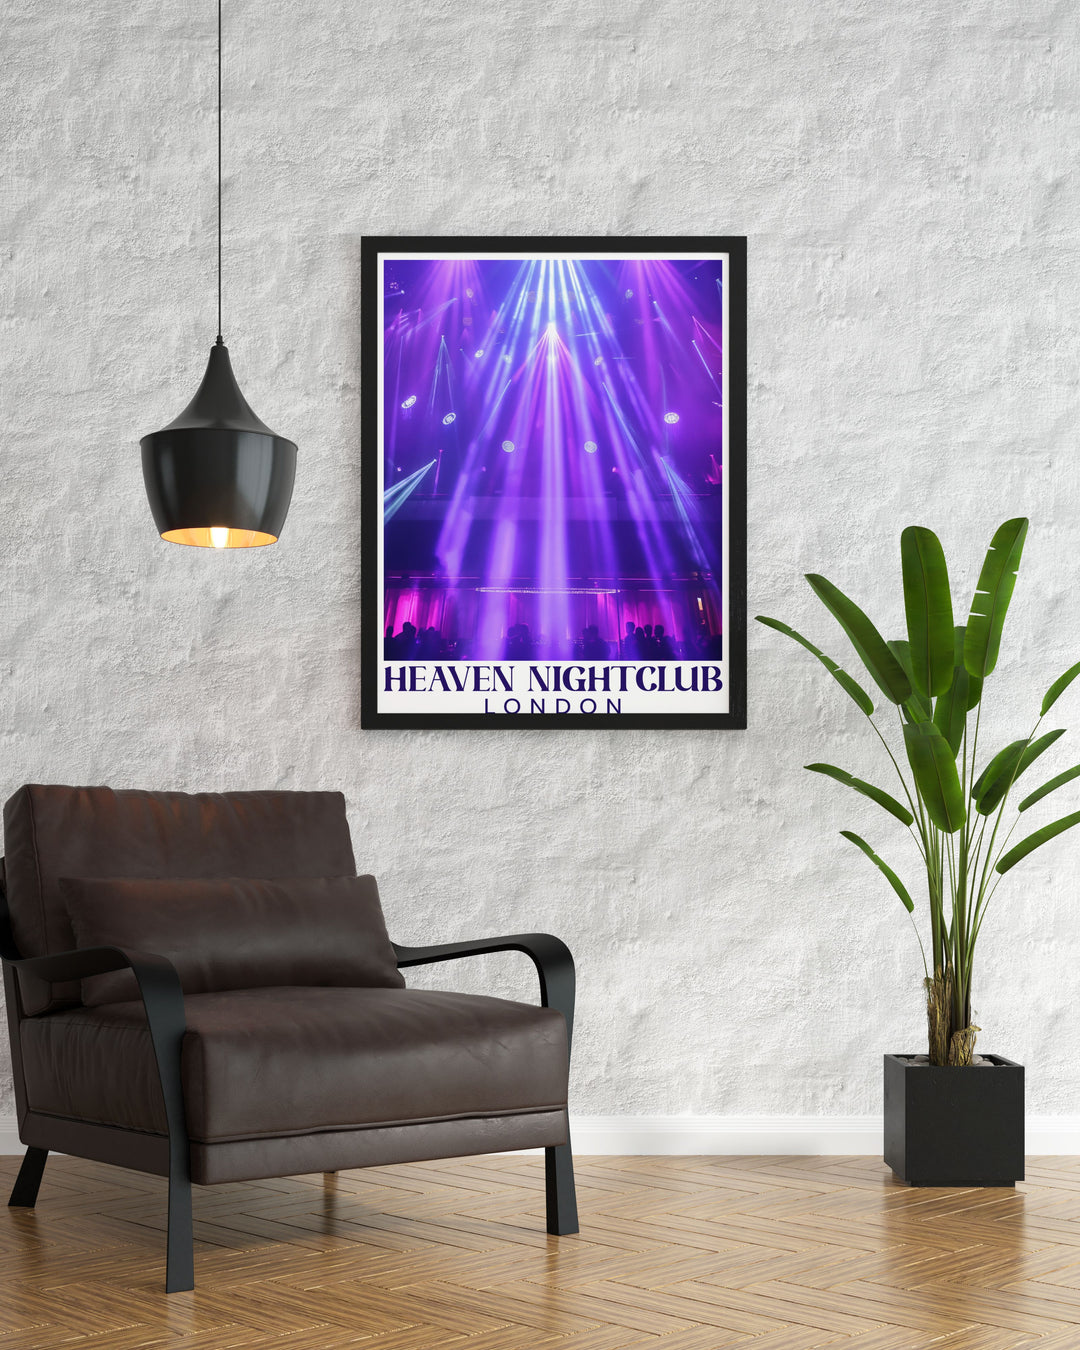 The travel poster of Heaven Nightclub brings the rich history and lively environment of this iconic venue into your home.